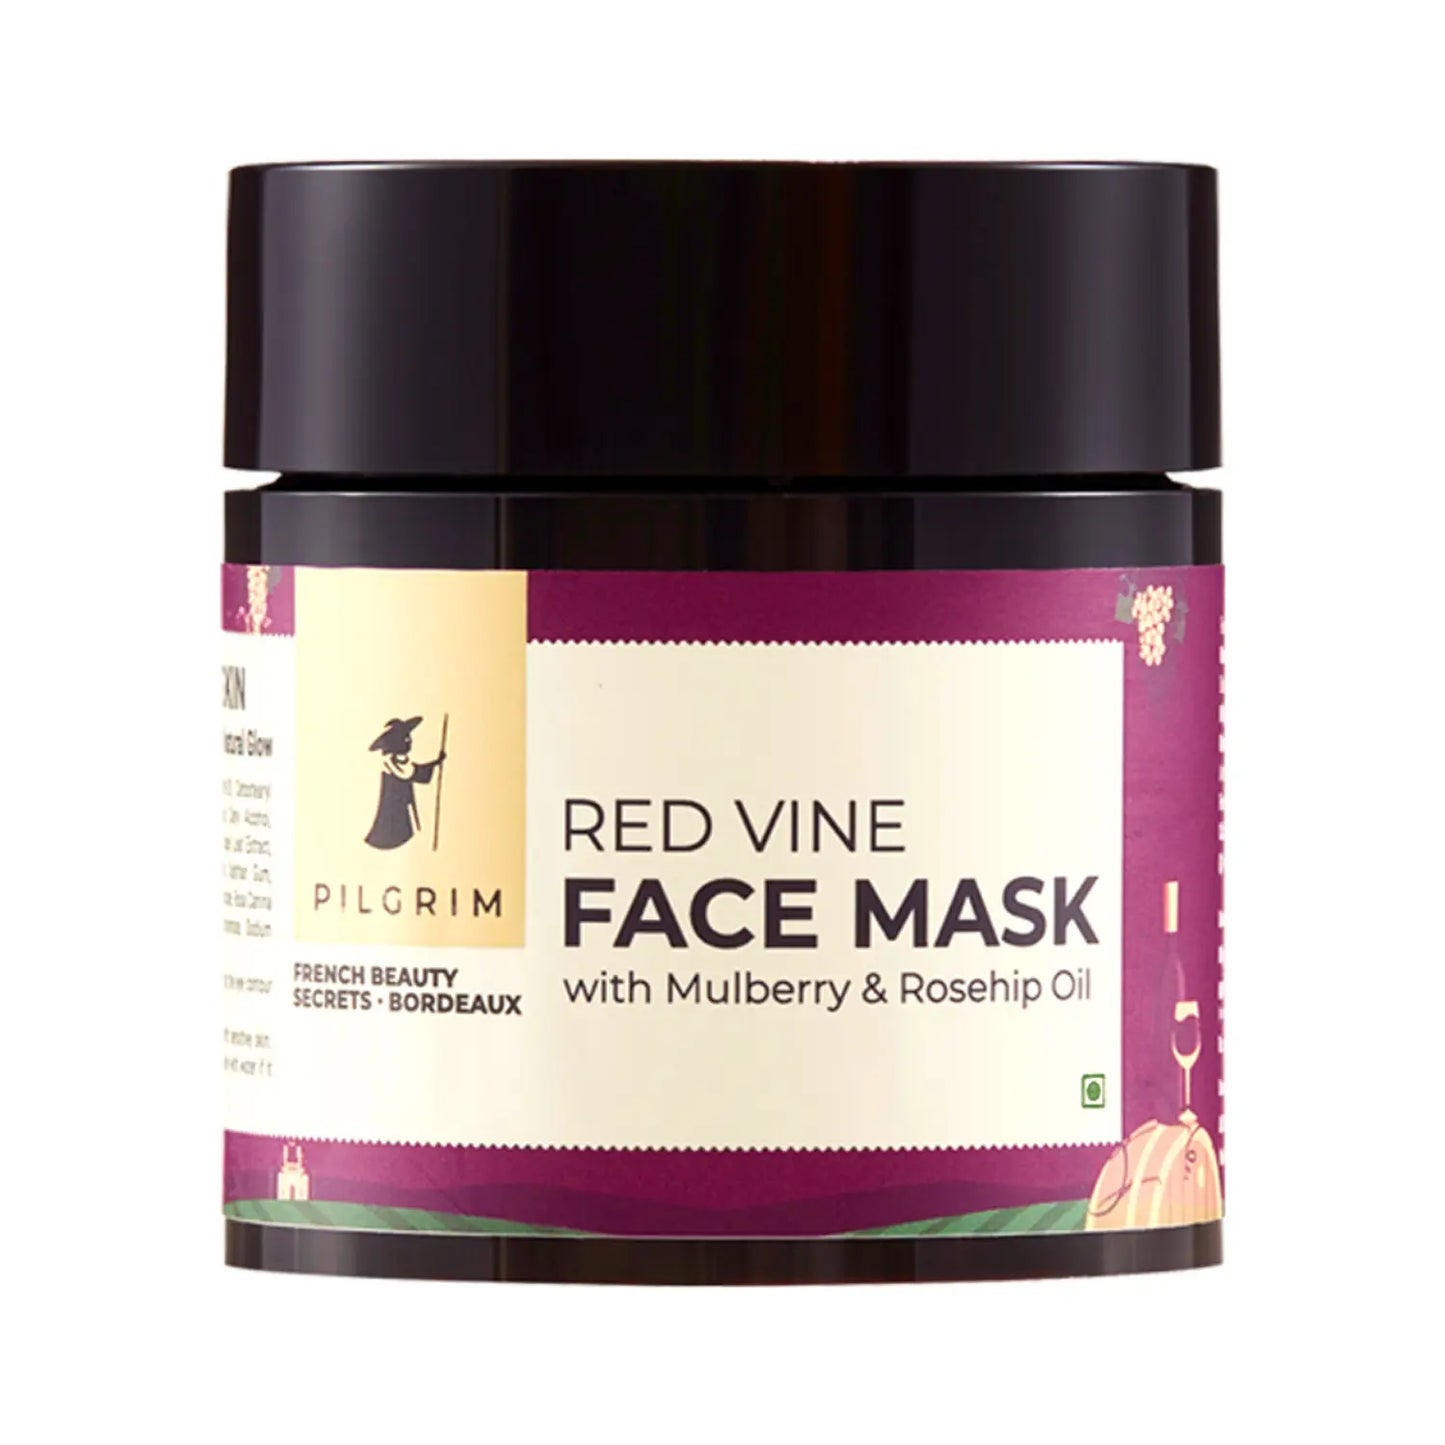 Pilgrim Red Vine Face Mask With Mulberry & Rosehip Oil (100g)